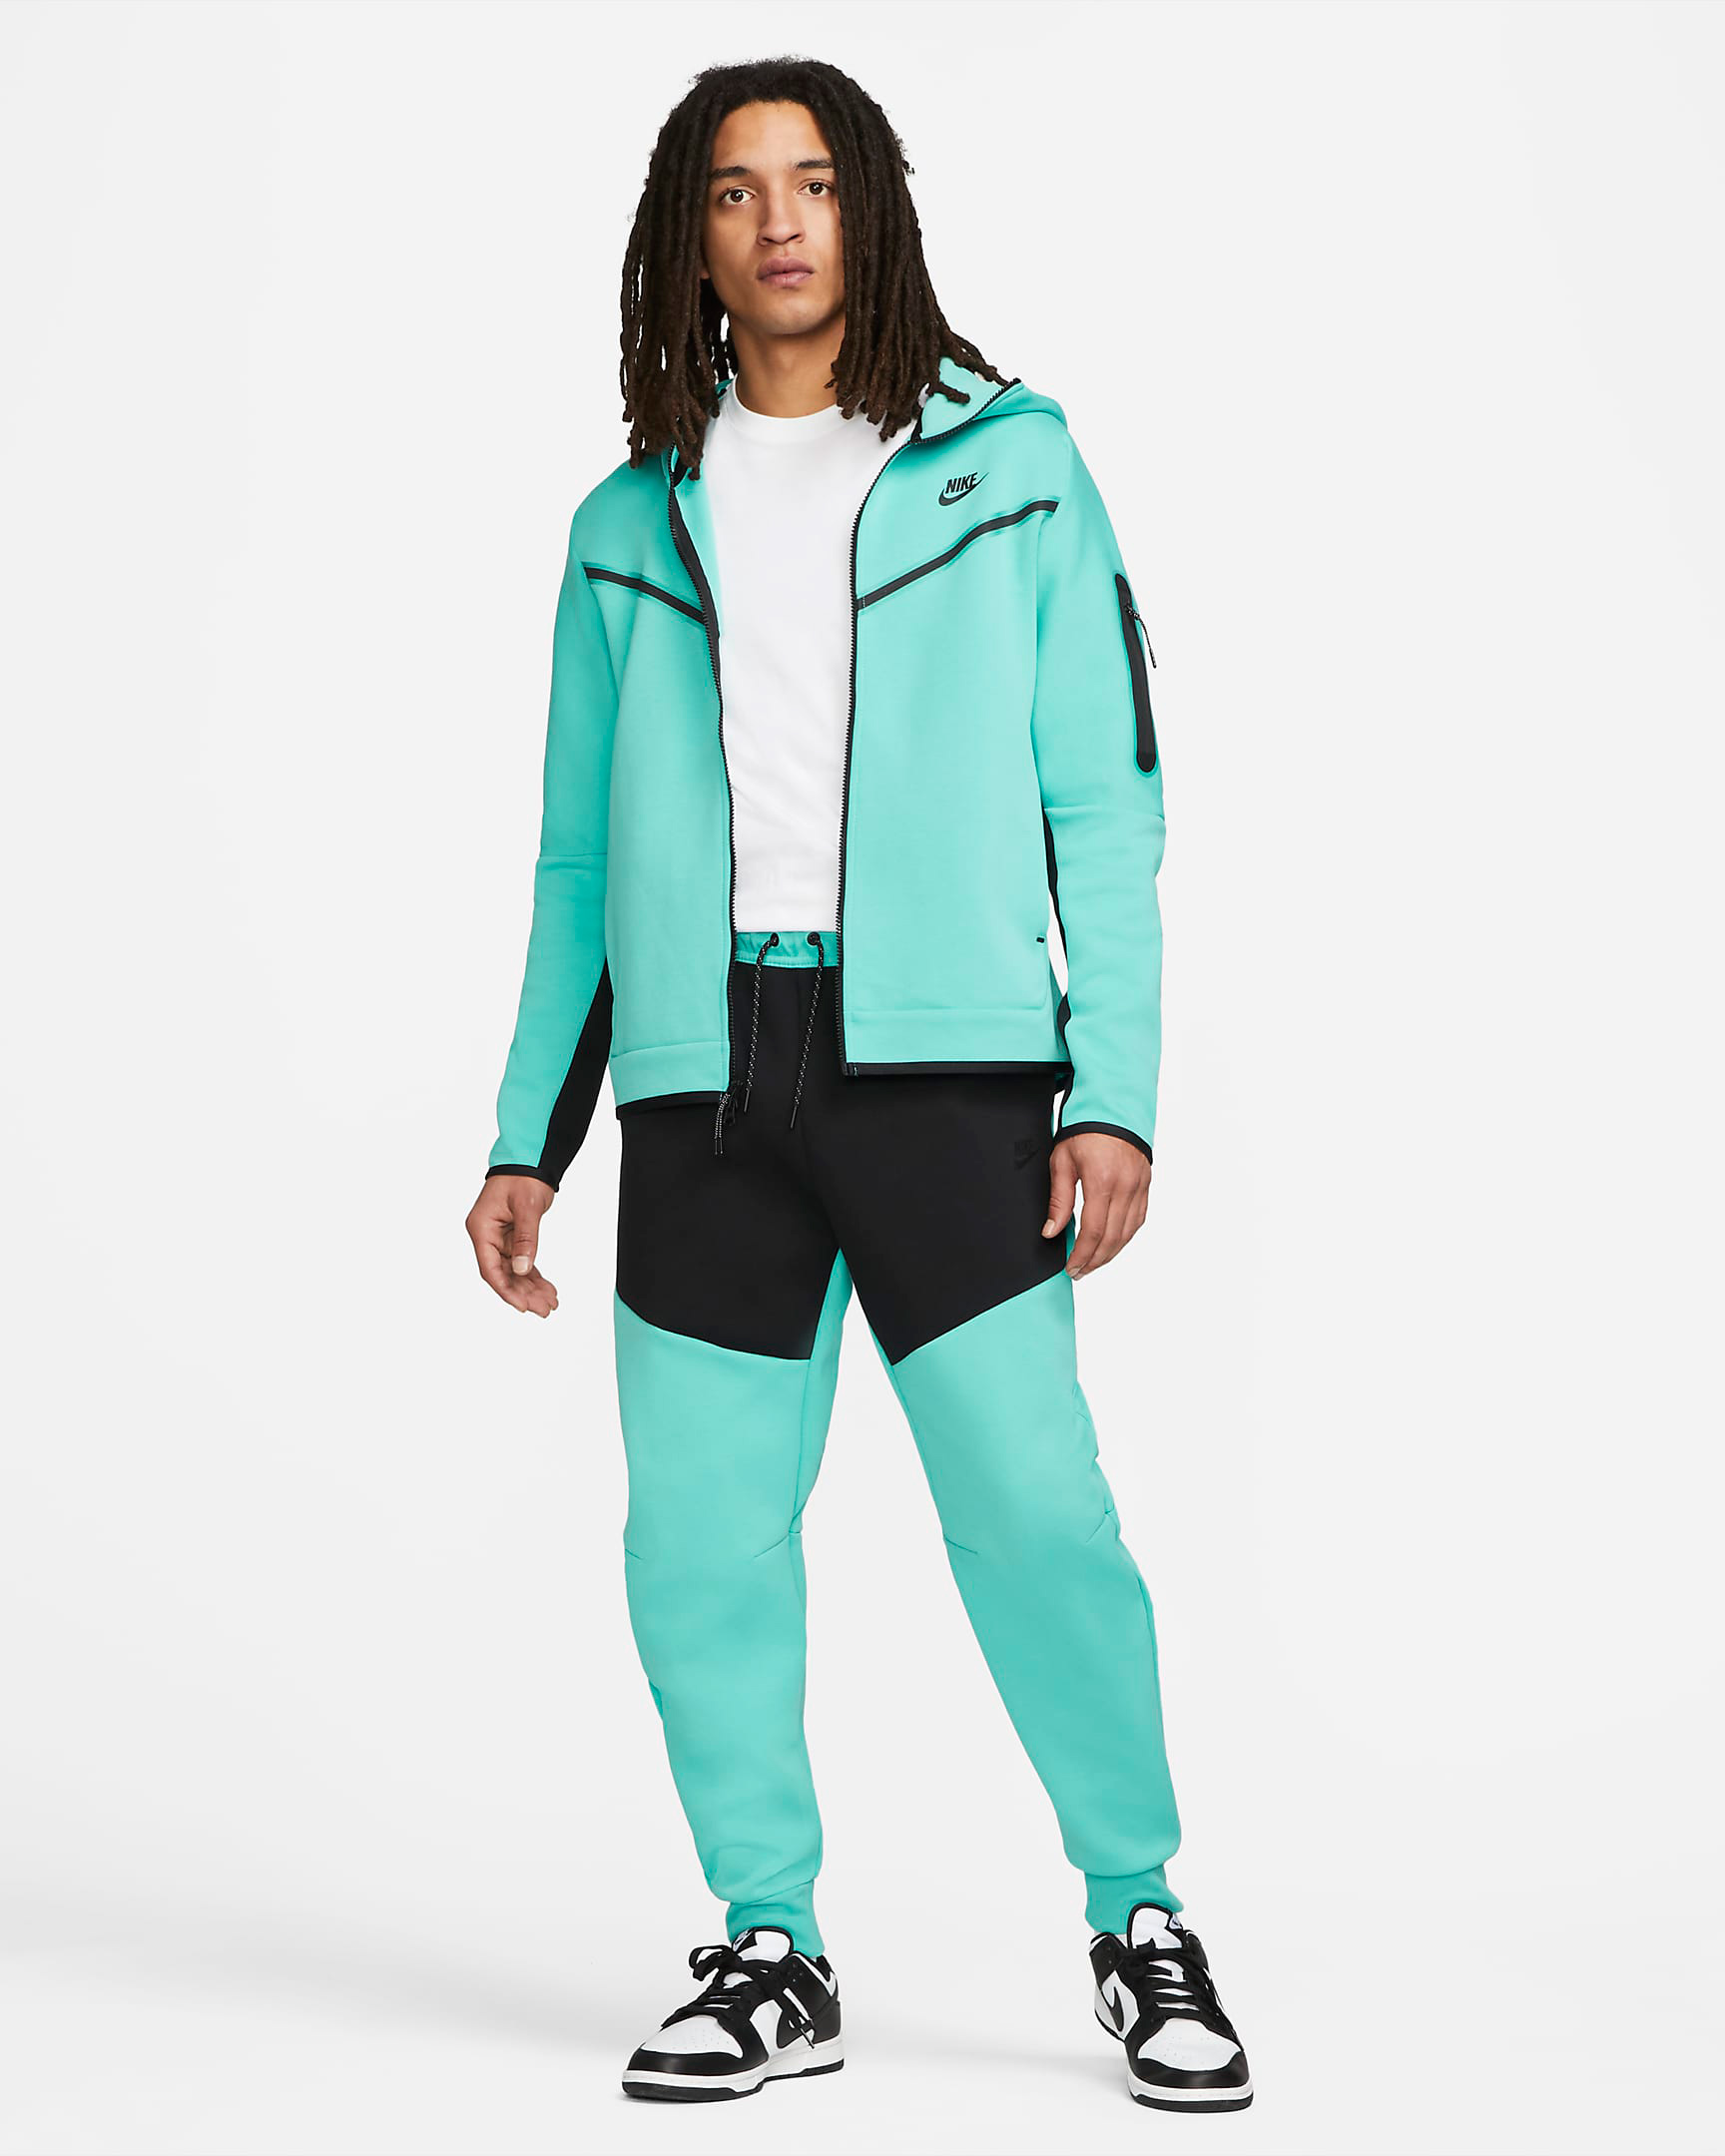 Nike Washed Teal Shirts Clothing and Sneakers